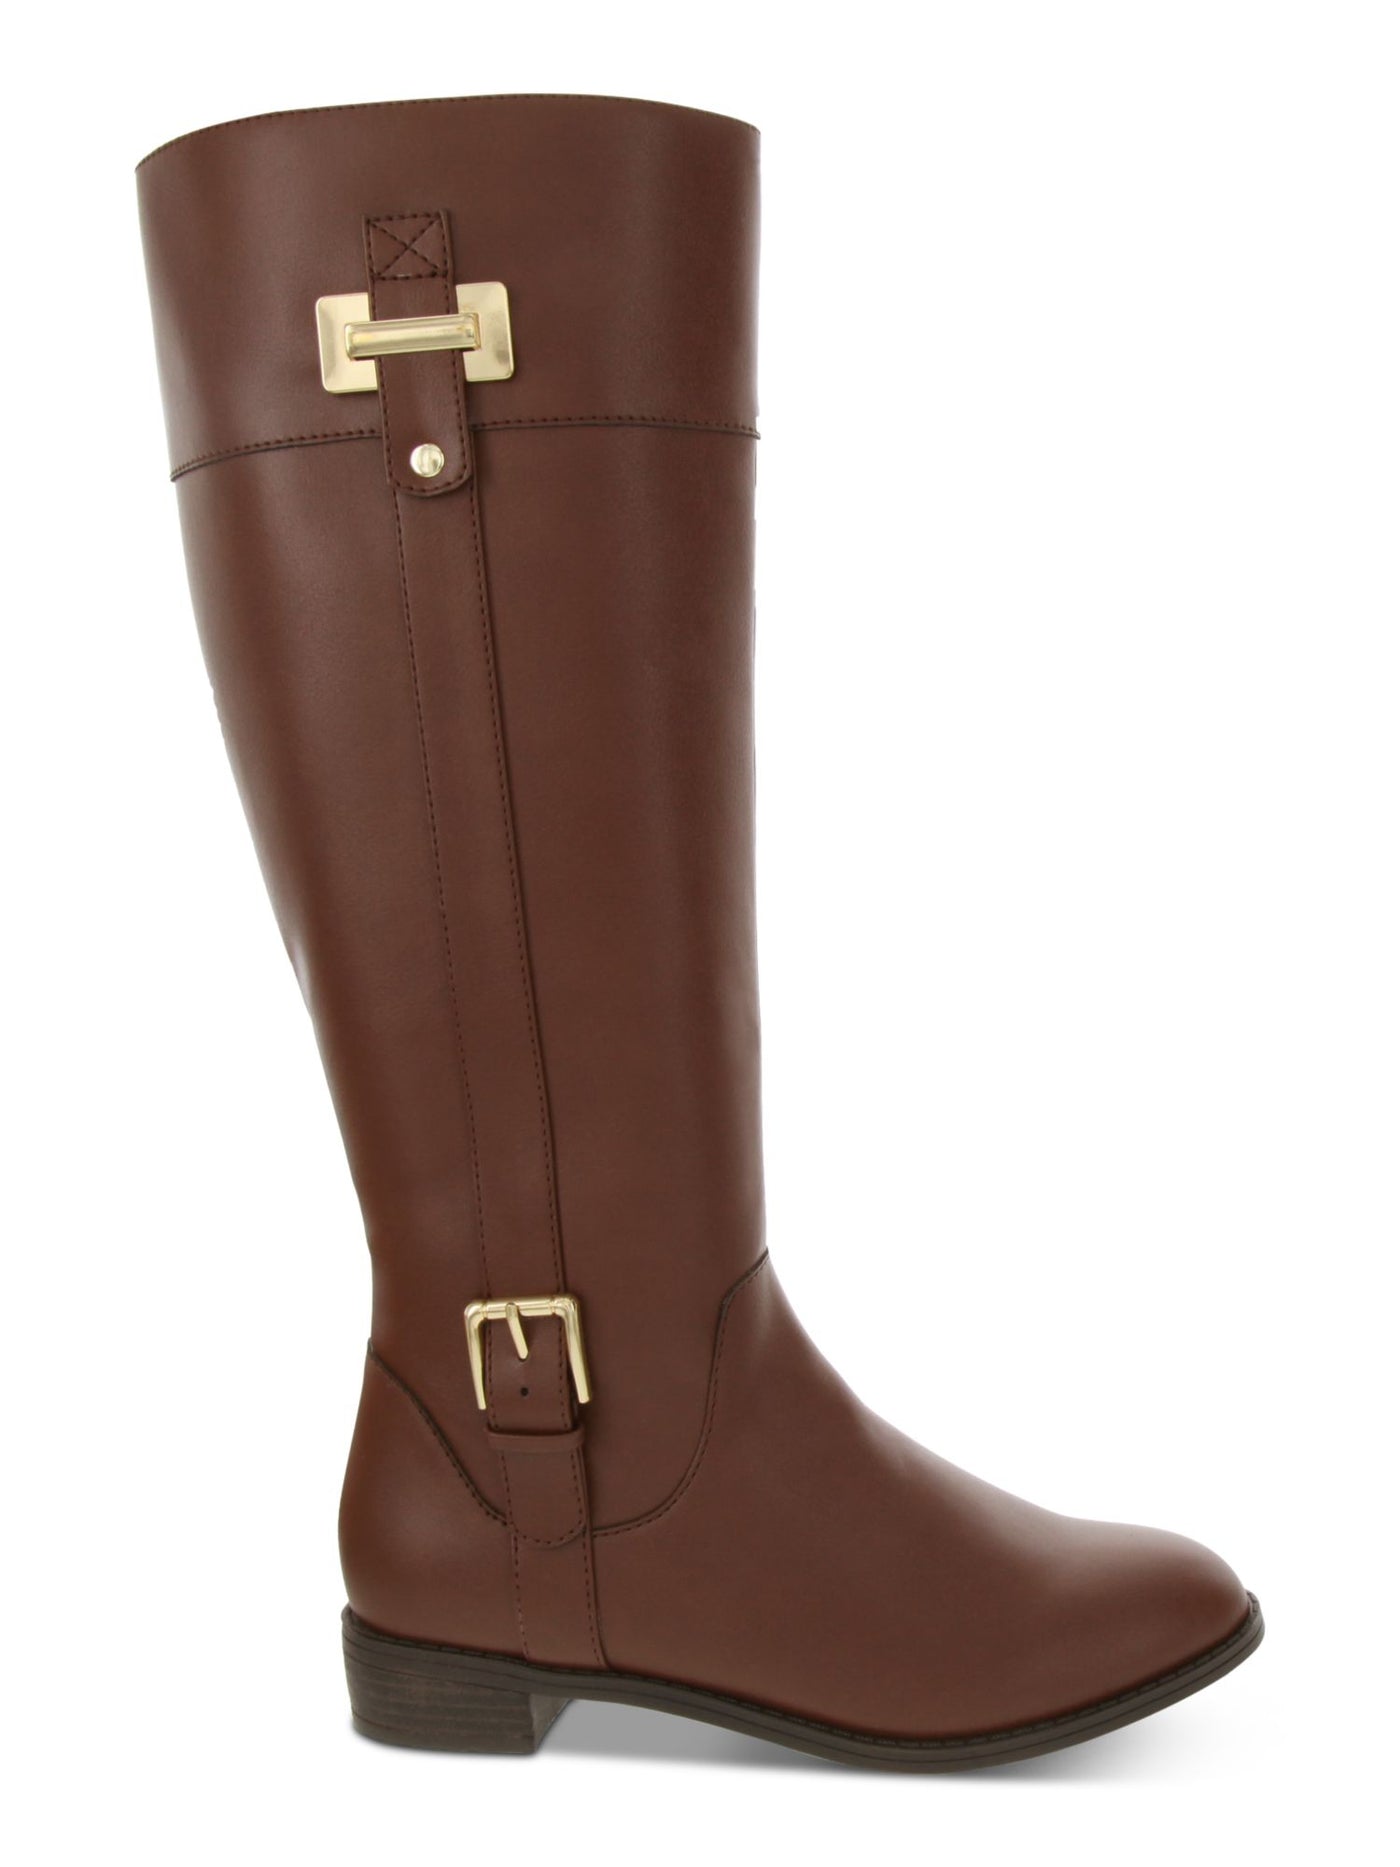 KAREN SCOTT Womens Brown Studded Hardware Cushioned Buckle Accent Deliee2 Round Toe Block Heel Zip-Up Riding Boot 8 W WC